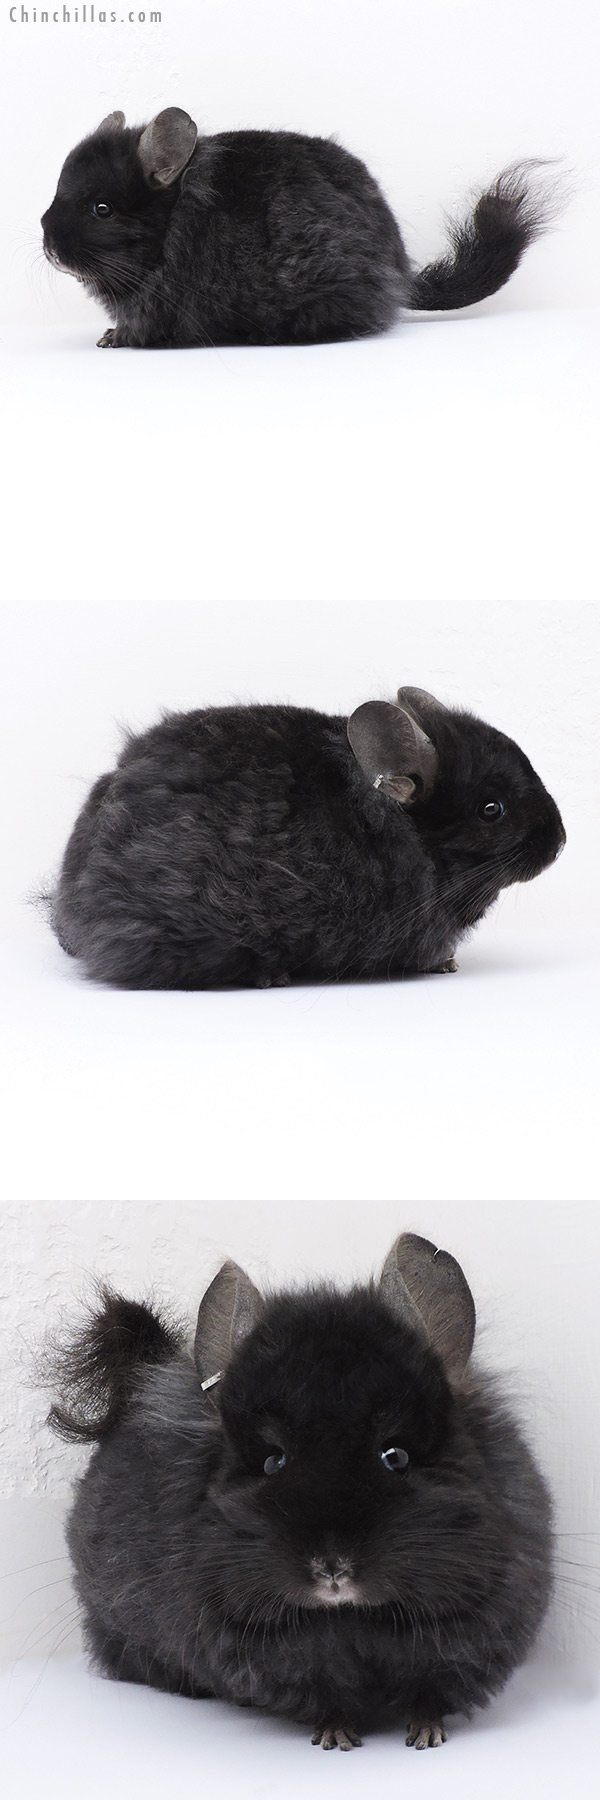 Chinchilla or related item offered for sale or export on Chinchillas.com - 19095 Ebony Royal Imperial Angora Female Chinchilla with Lion Mane